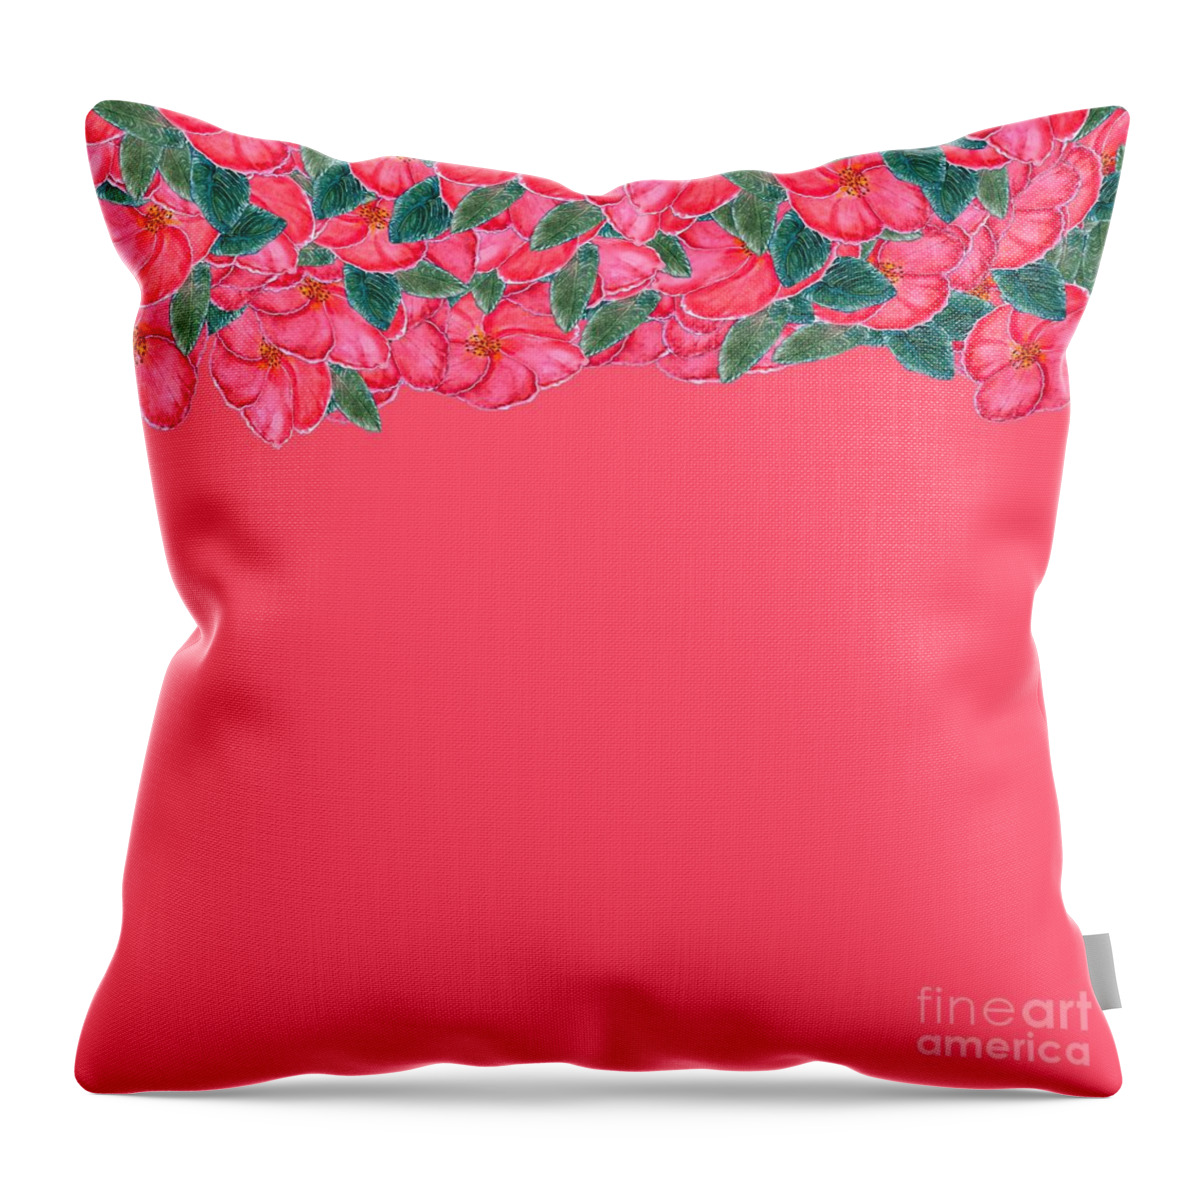 Coral Throw Pillow featuring the digital art Coral Floral by Delynn Addams